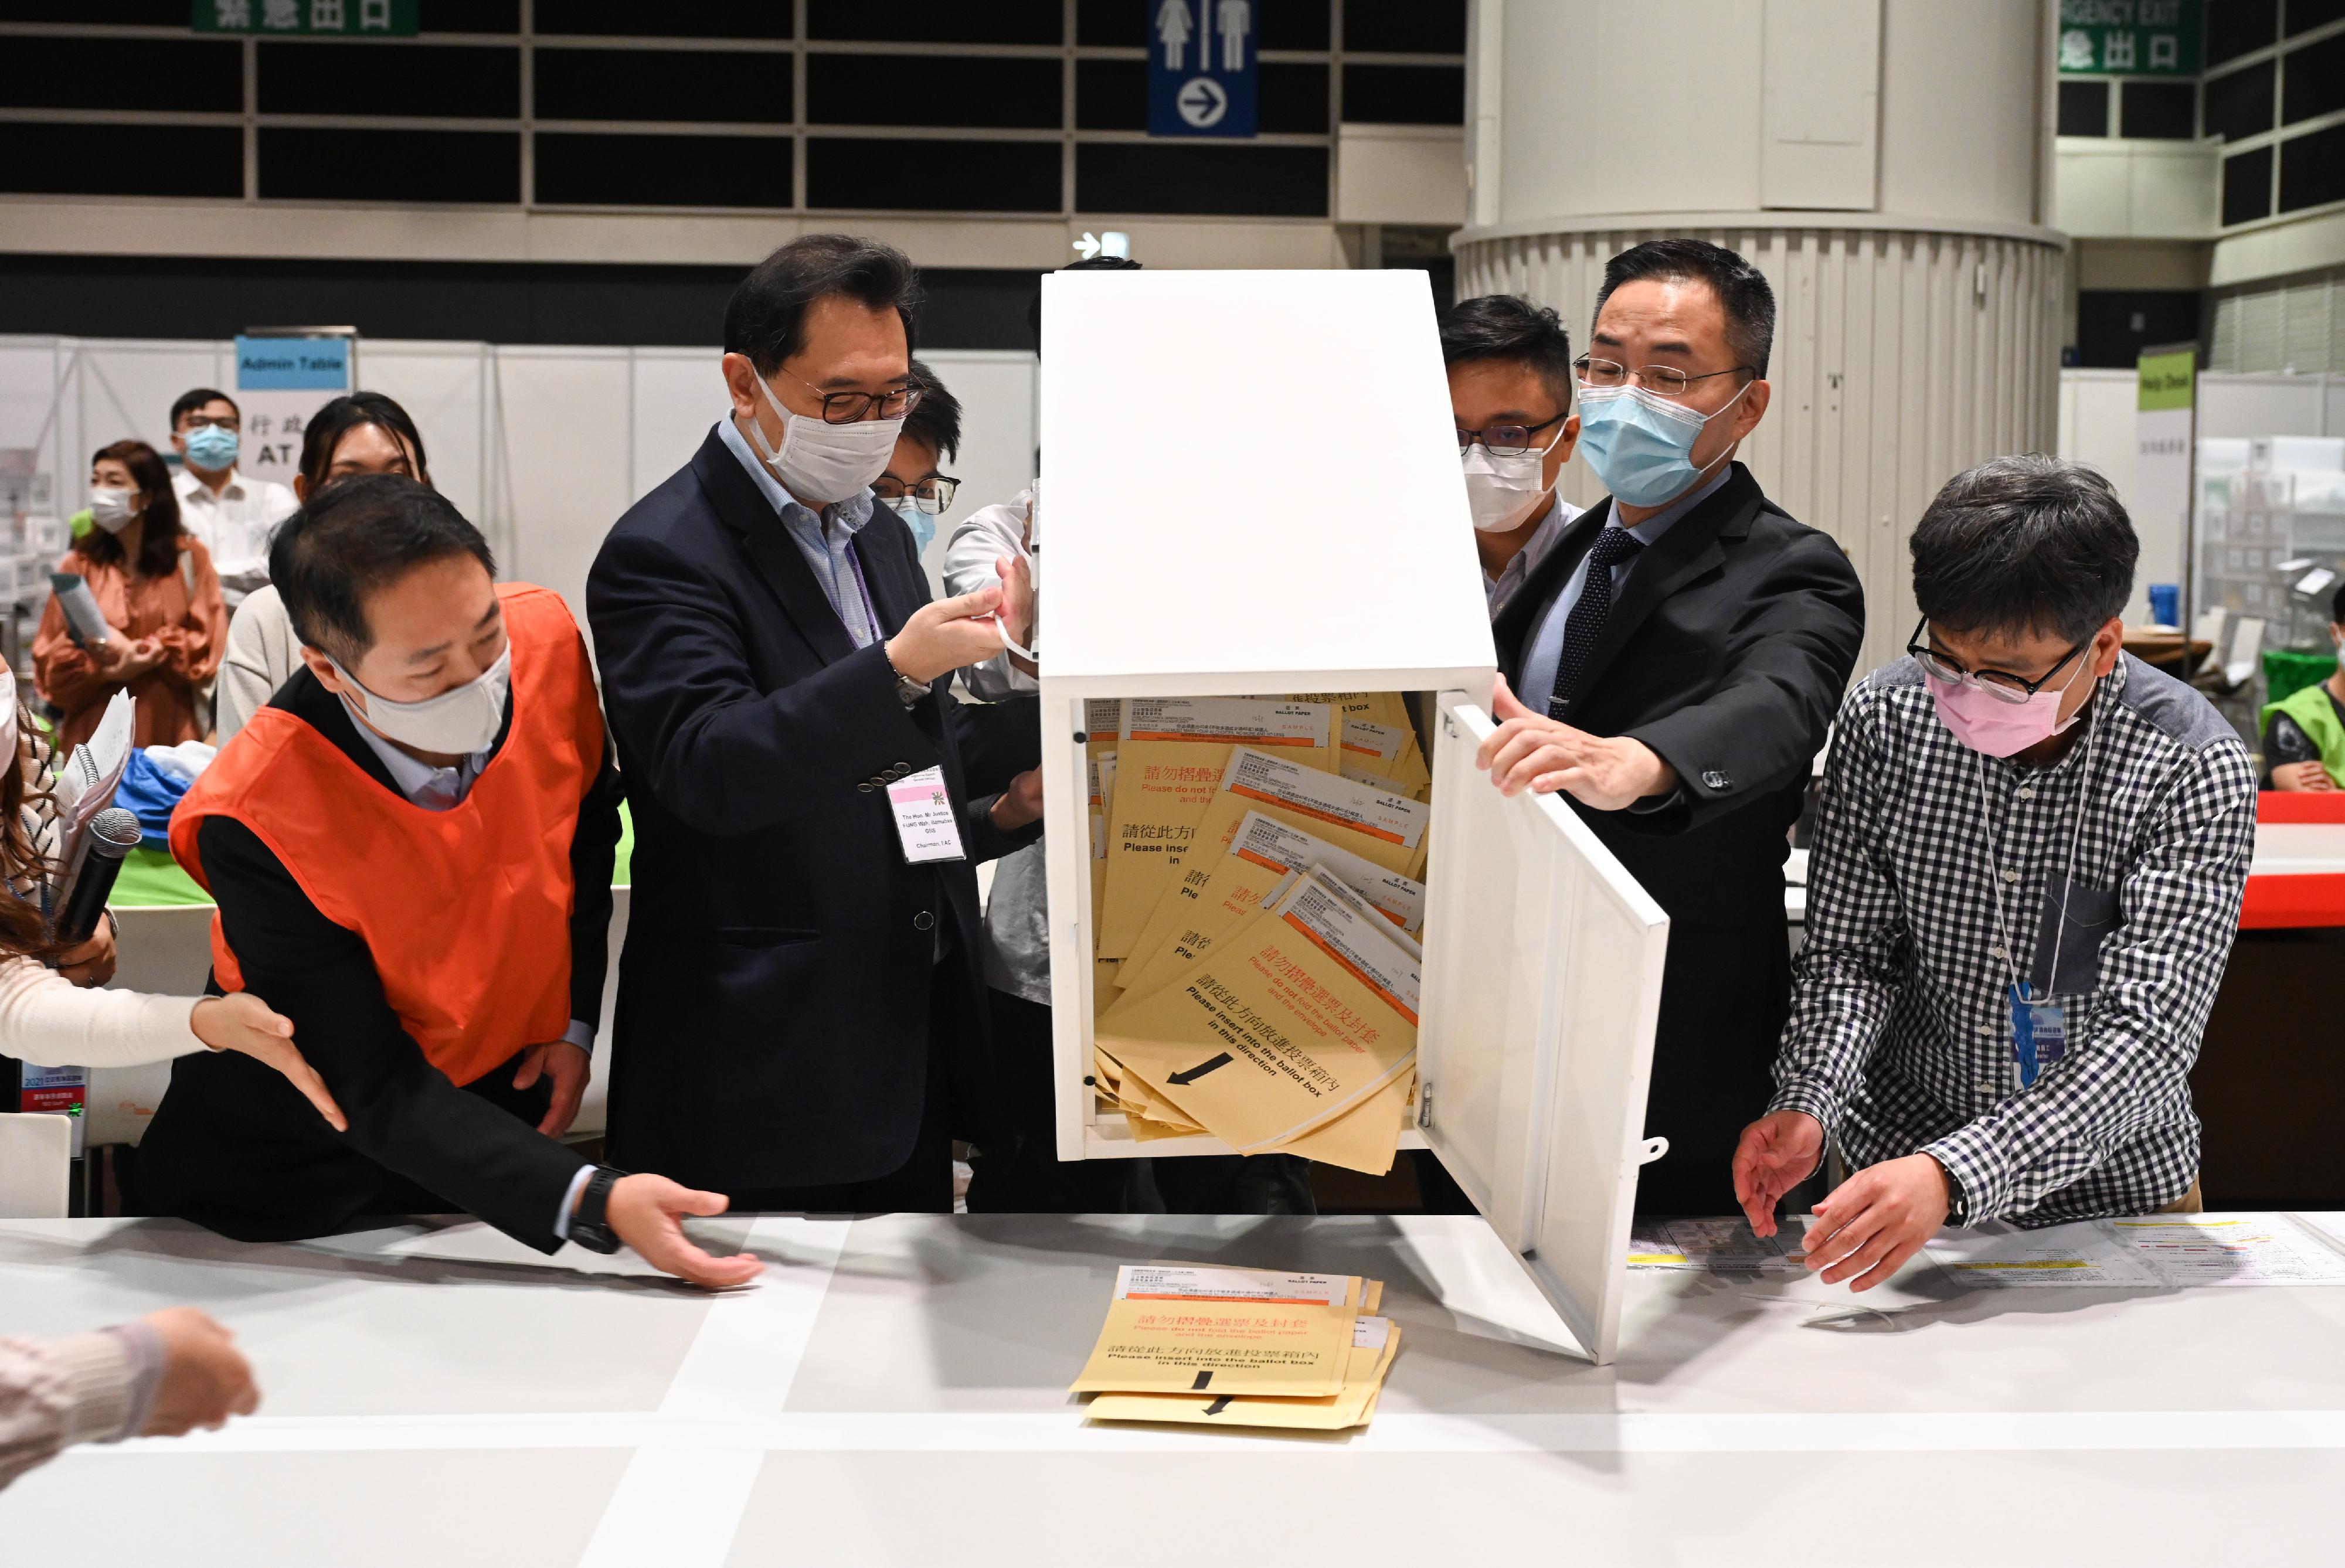 The Chairman of the Electoral Affairs Commission, Mr Justice Barnabas Fung Wah, visited the central counting station of the 2021 Legislative Council General Election at the Hong Kong Convention and Exhibition Centre and inspected the training sessions with practical sessions and simulated activities for counting staff. Photo shows Mr Justice Fung (second left), and the Permanent Secretary for Constitutional and Mainland Affairs, Mr Roy Tang (second right), in a simulation of emptying a ballot box.